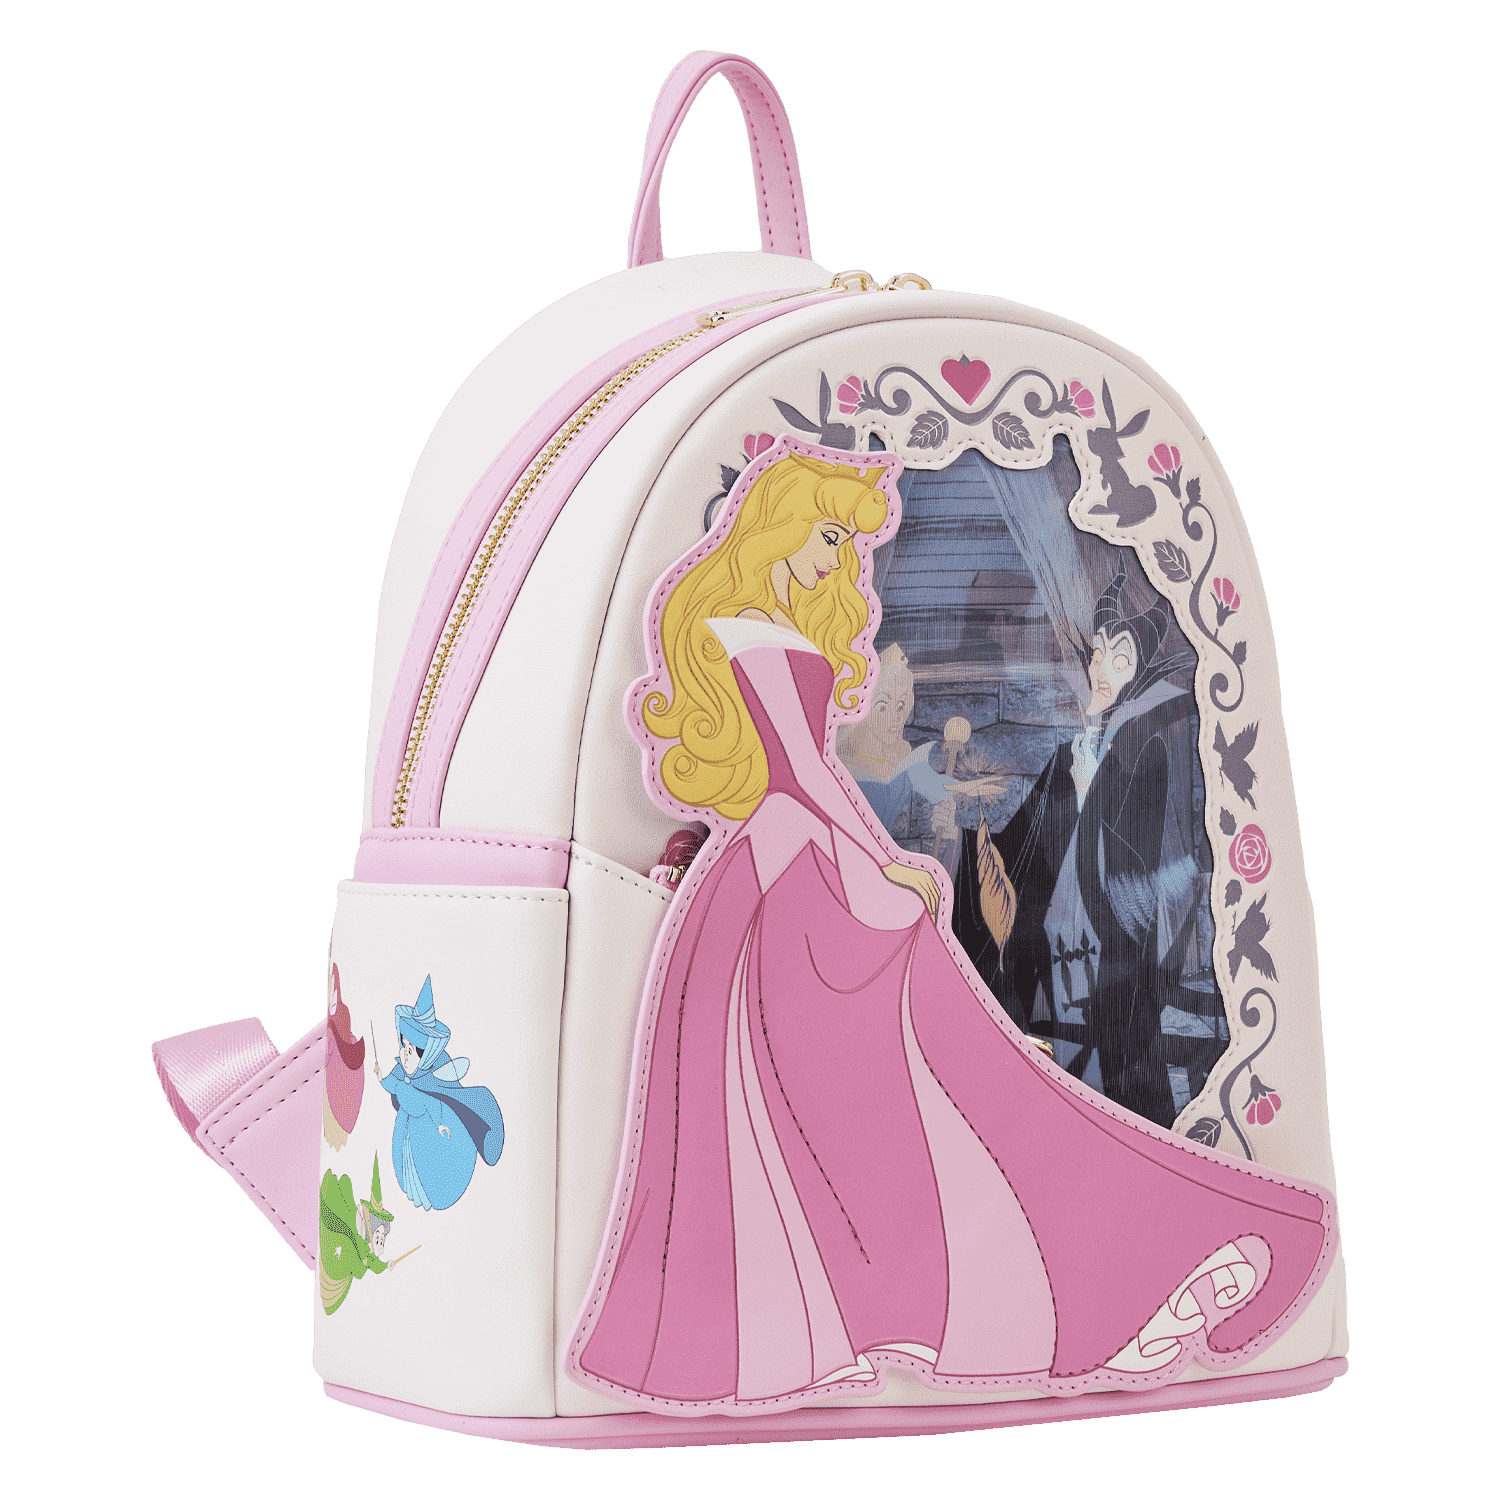 This Sleeping Beauty Loungefly Bag is Once Upon a Dream 